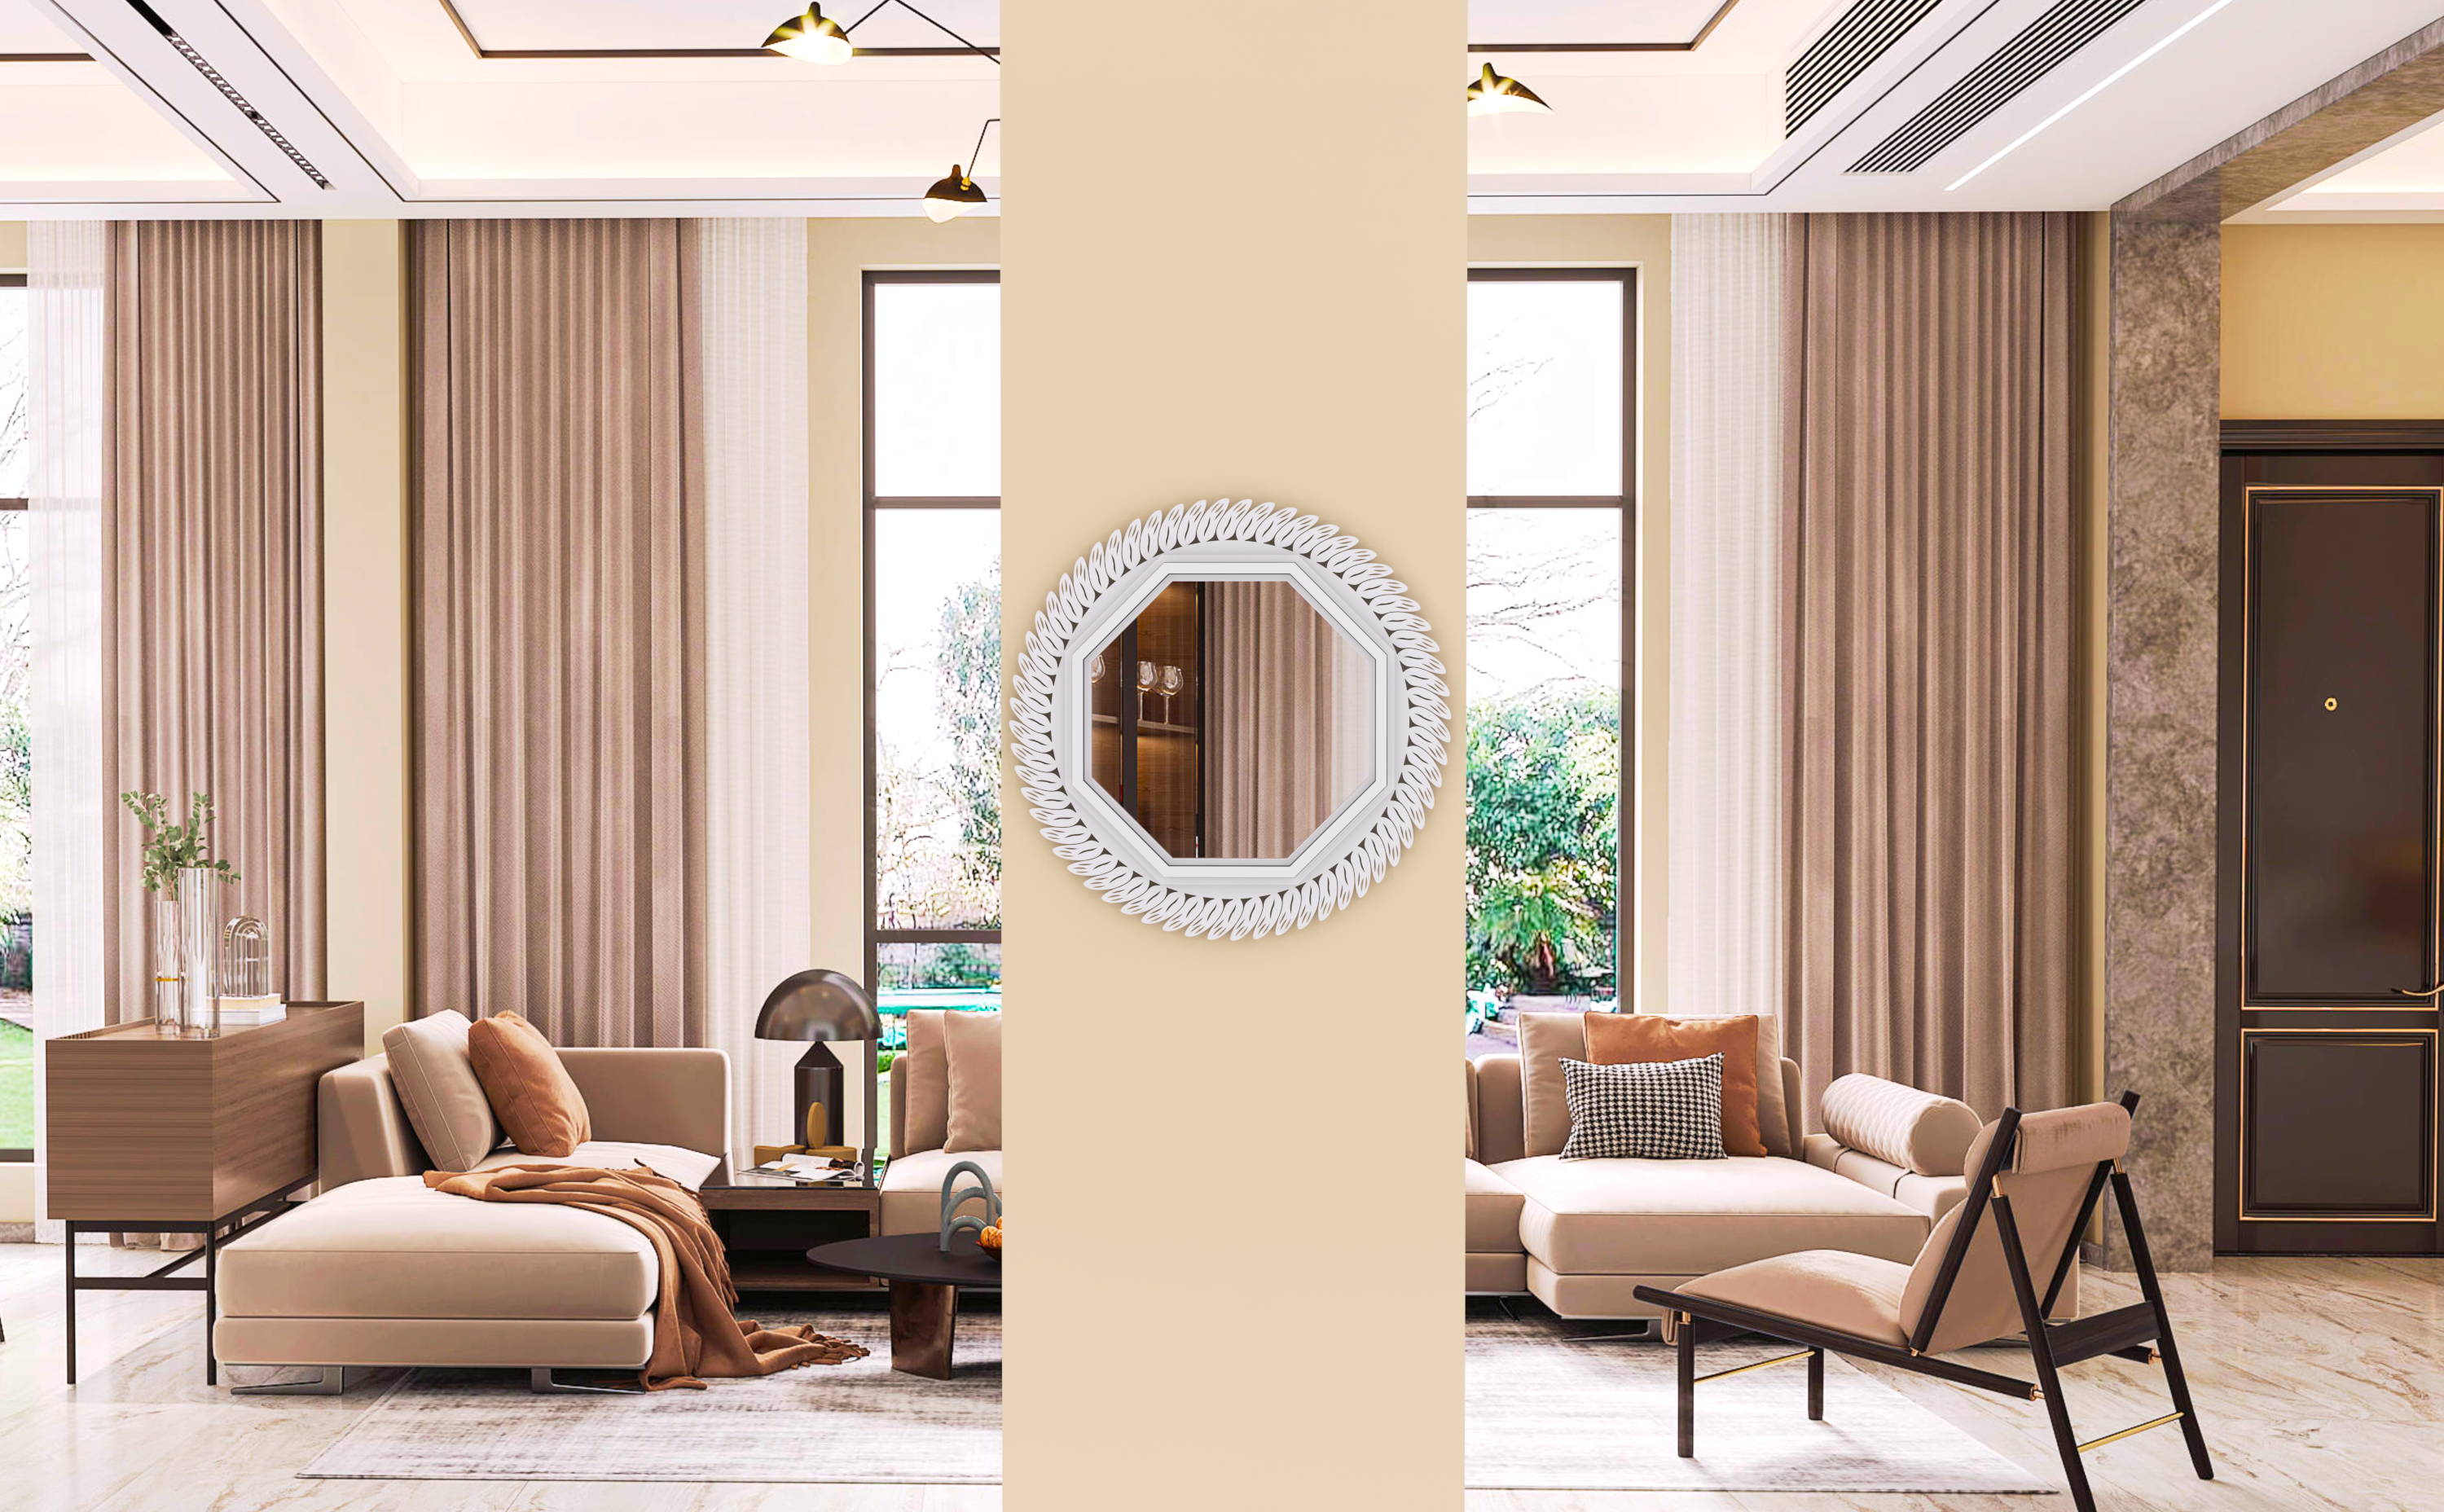 24"x24" White Decorative Wall Mirror for Home, Octagonal Geometric Mirror with Metal Frame,Modern Hanging Mirrors for Living Room,Bedroom Entryway (Copy)